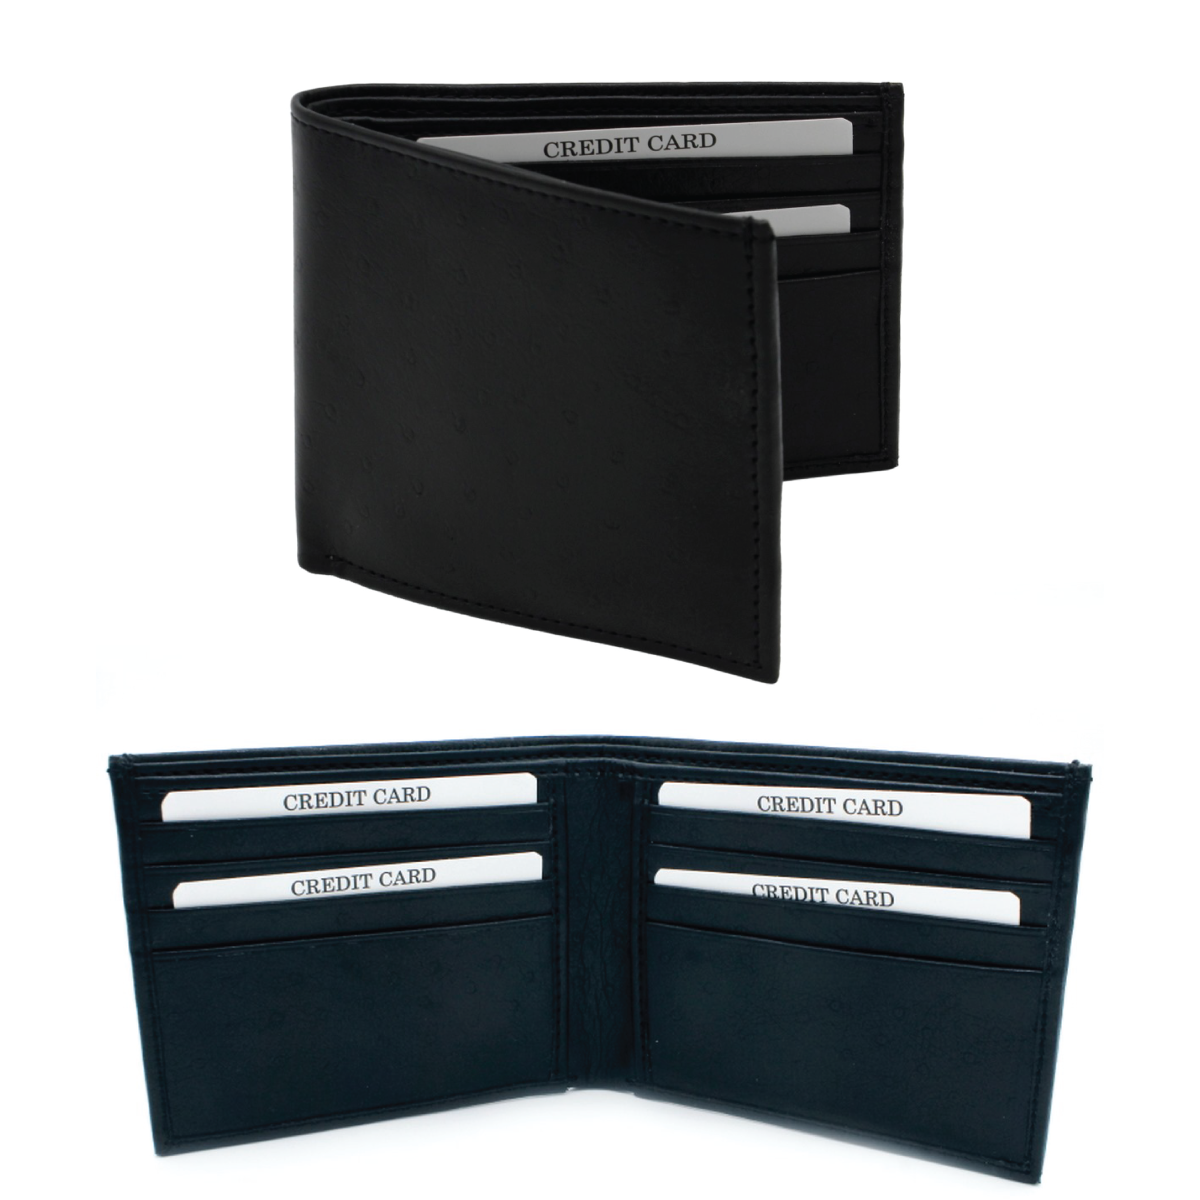 Black Leather Gents Wallet - For Employee, Corporate, Client or Dealer Gifting, Promotional Freebie, Return Gift JA2